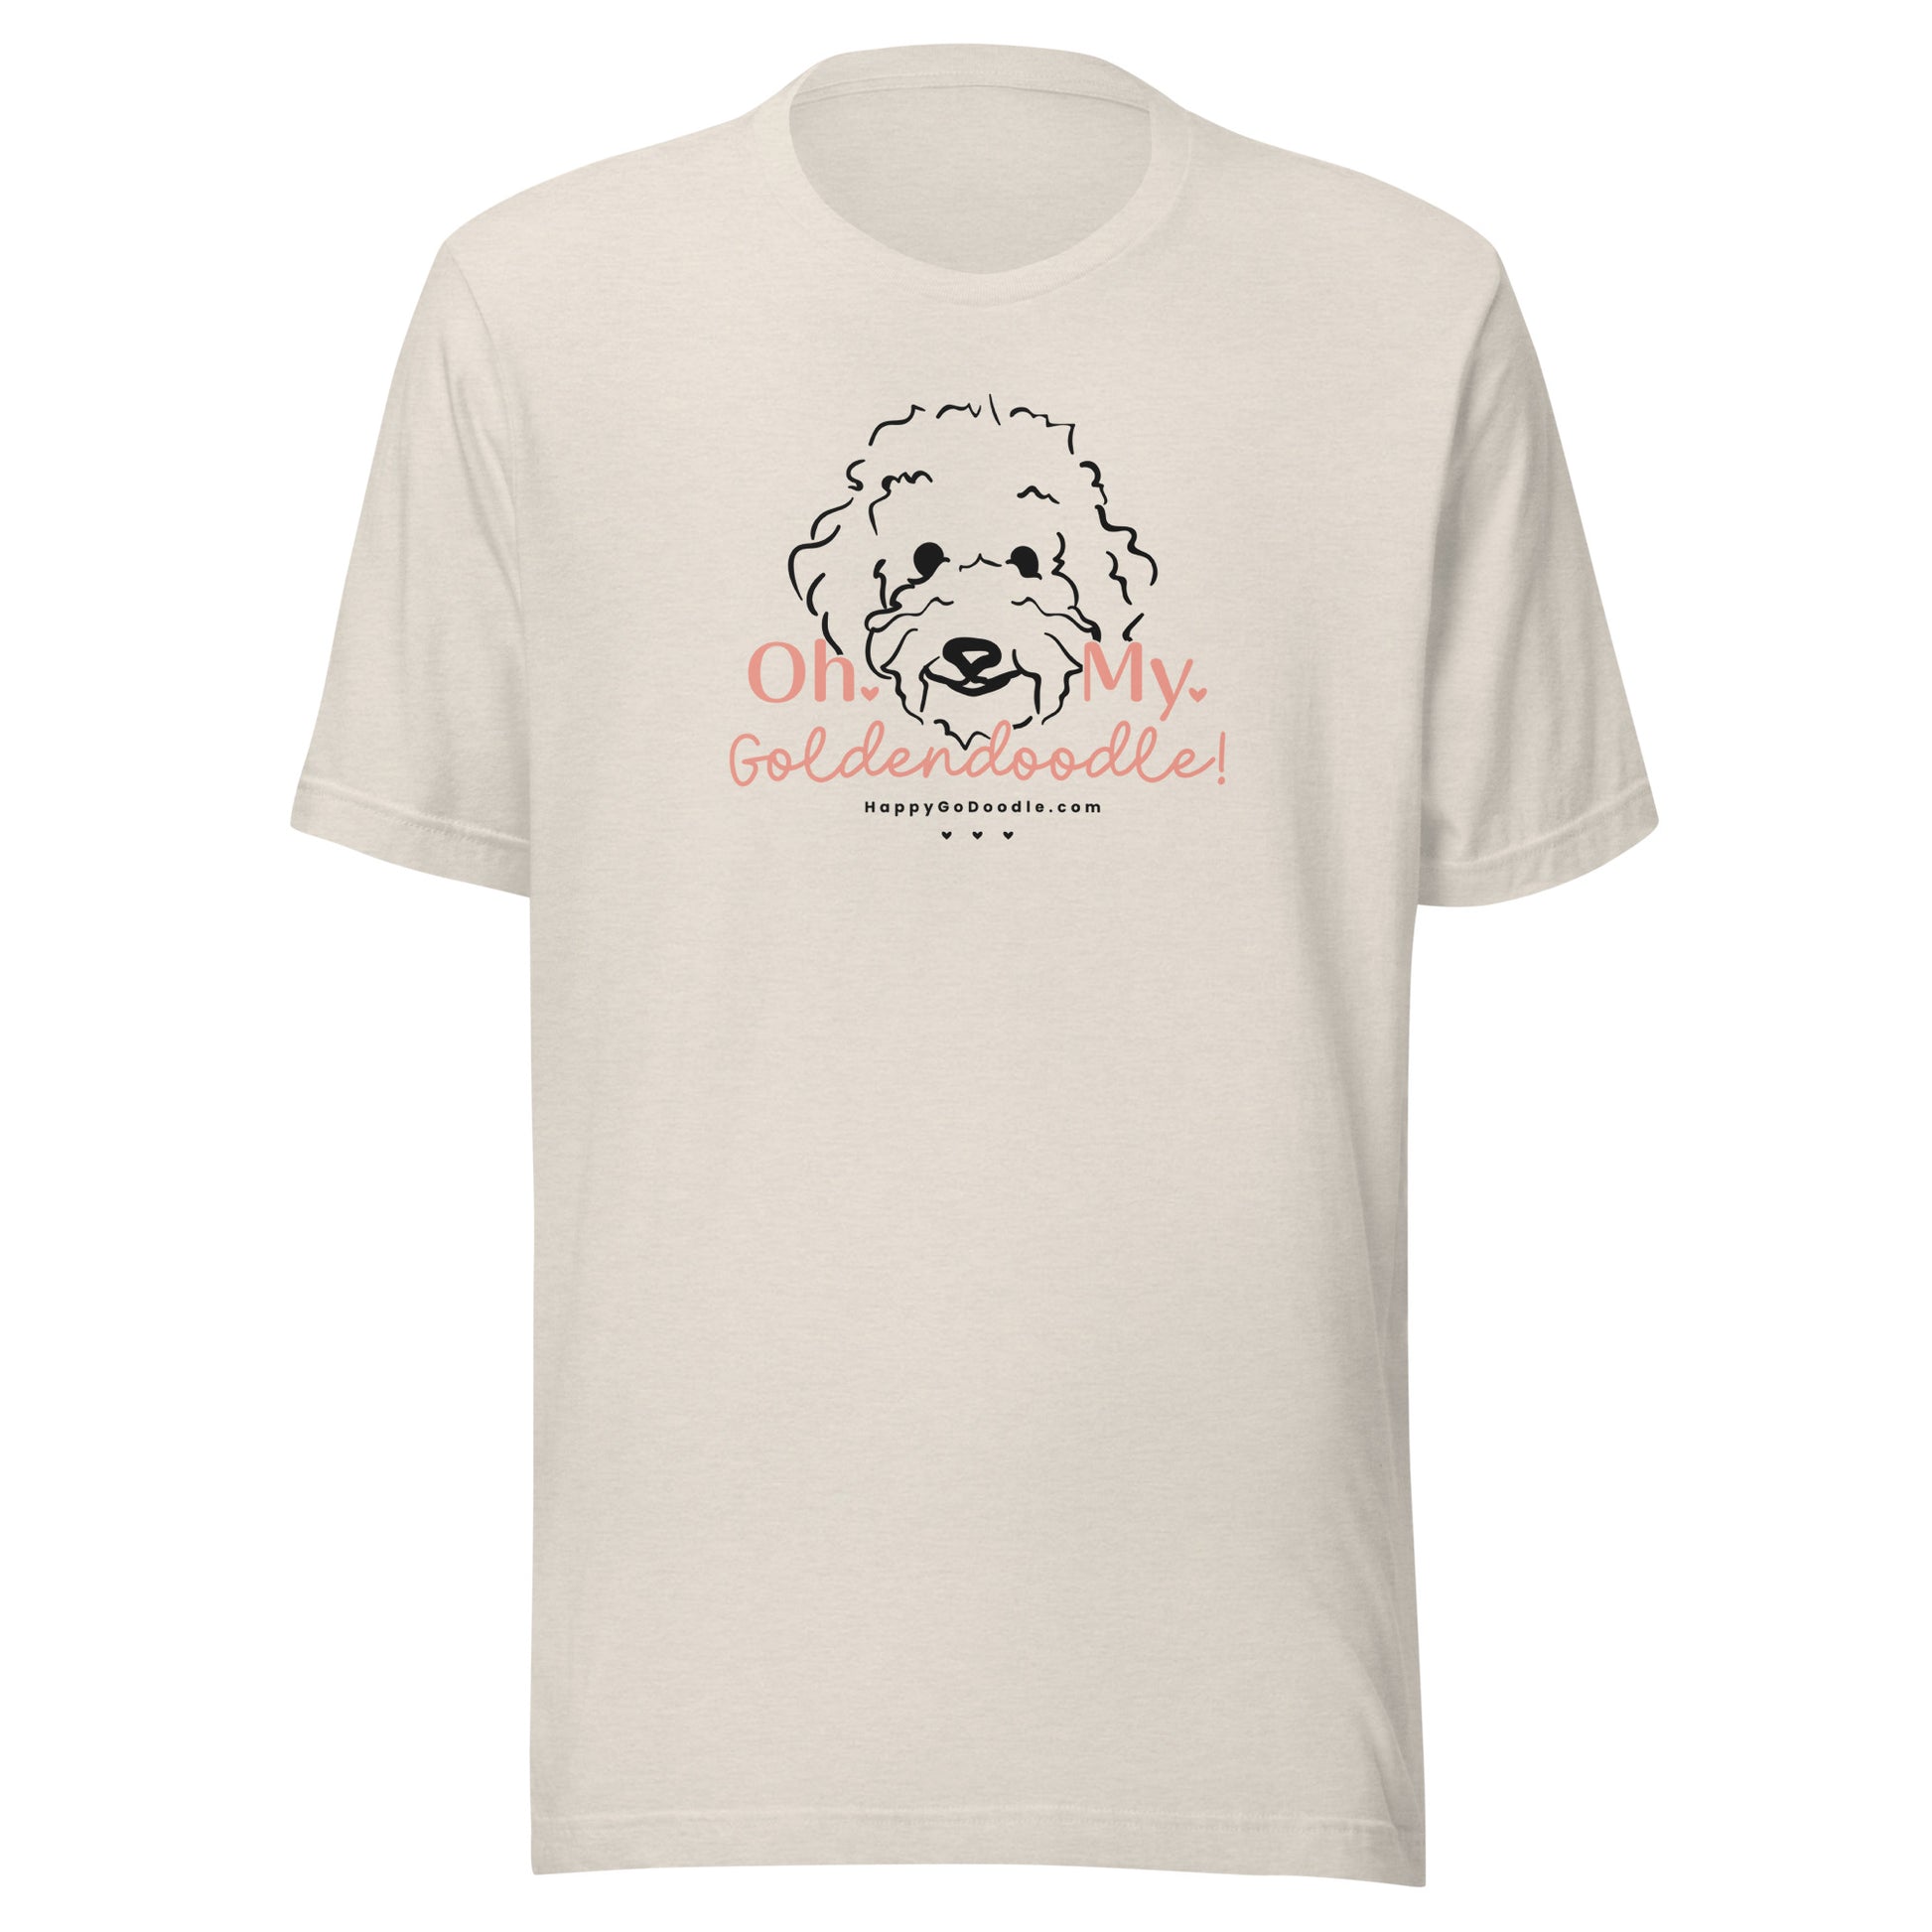 Goldendoodle t-shirt with Goldendoodle dog face and words "Oh My Goldendoodle" in heather dust color